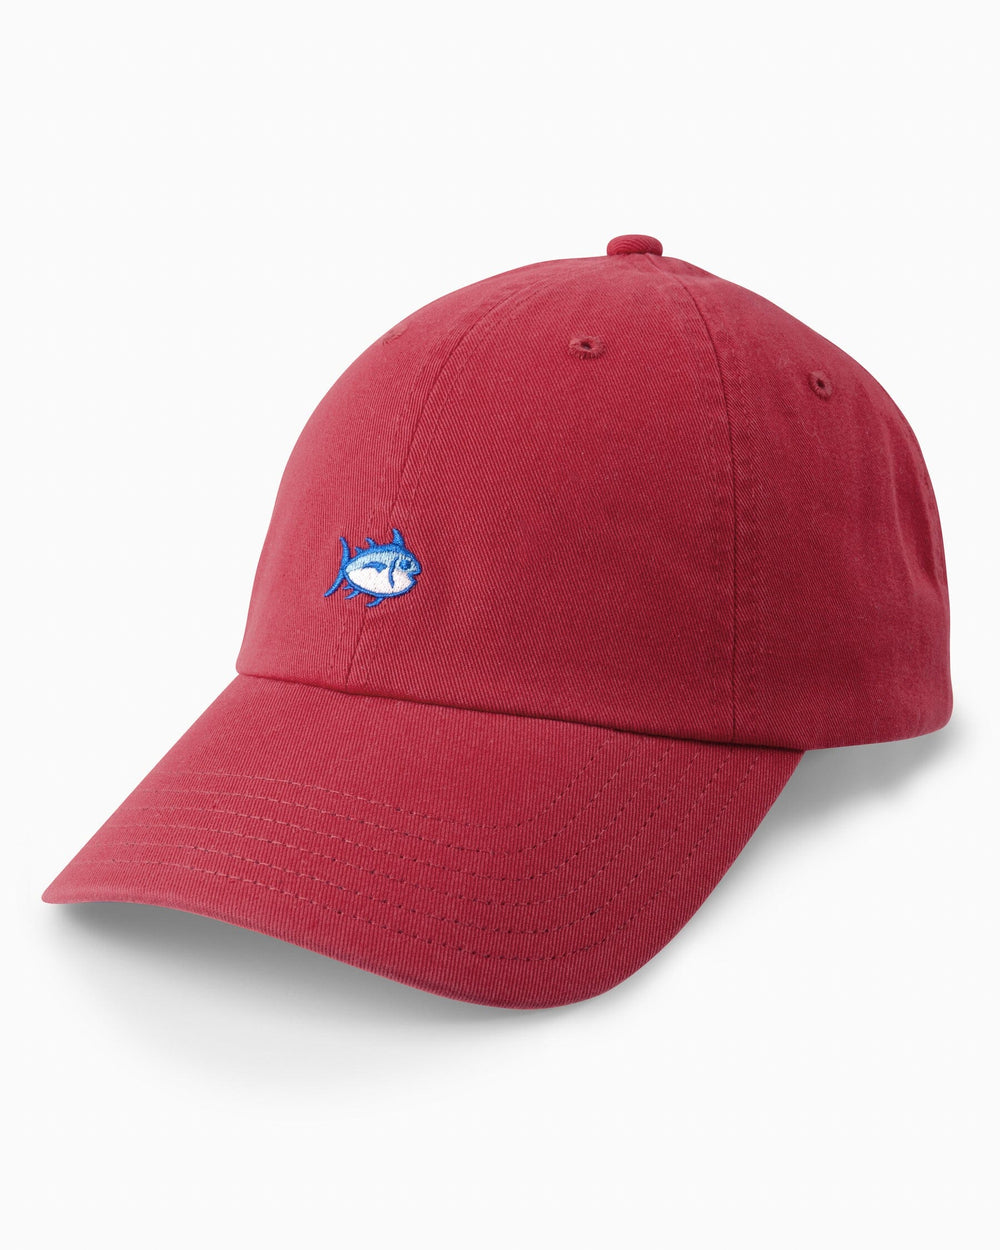 The front view of the Team Colors Skipjack Hat by Southern Tide - Crimson